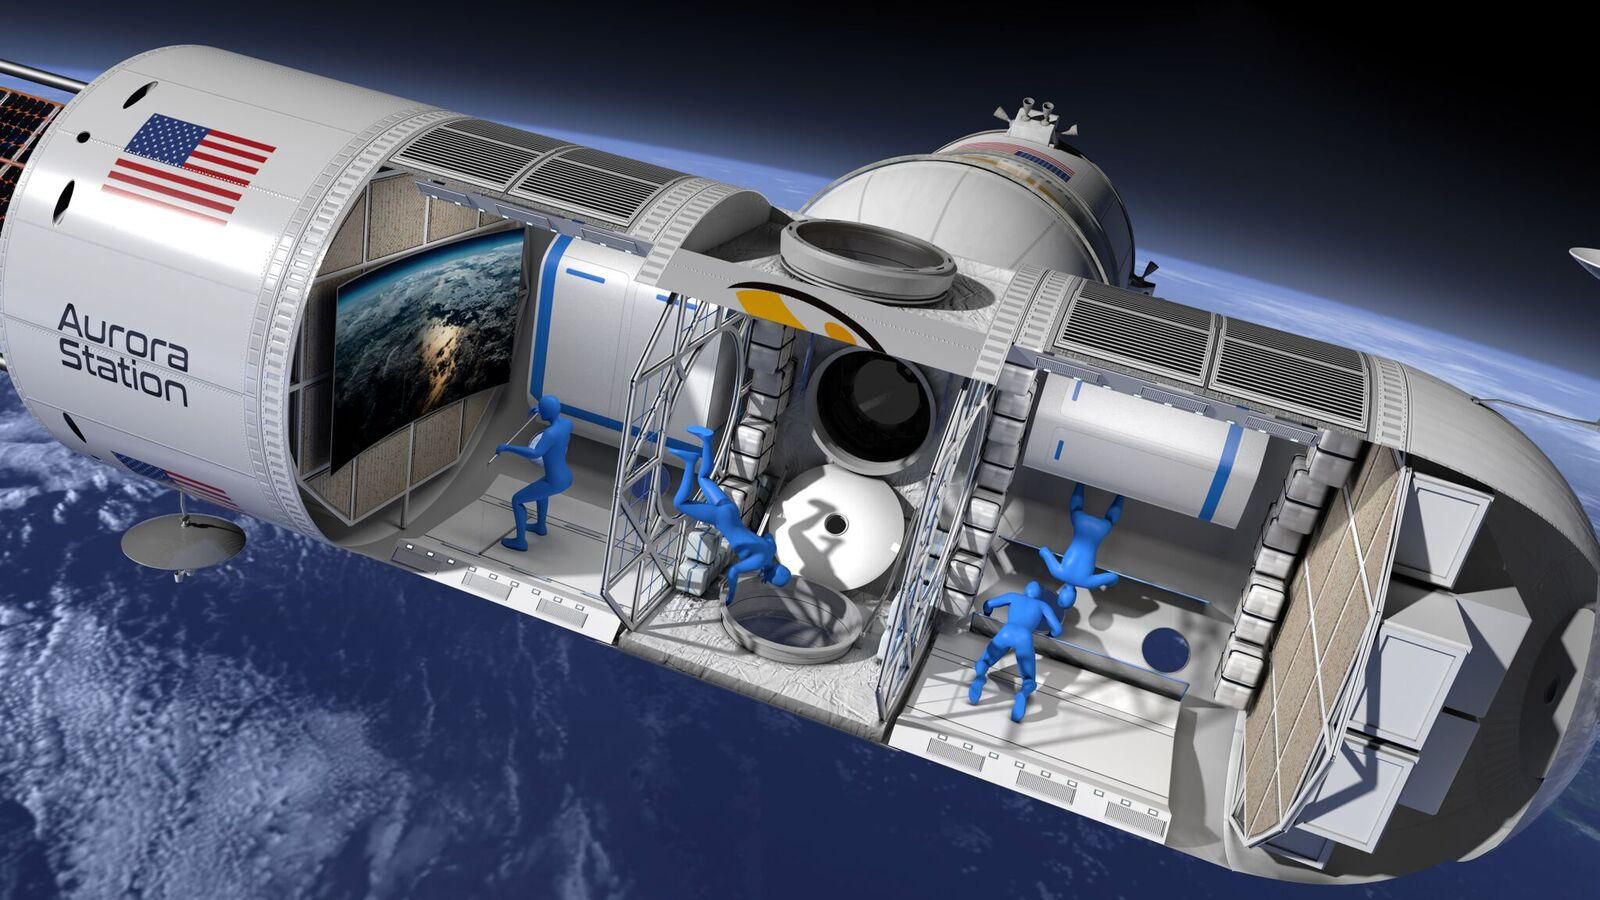 Stay at luxury space hotel Aurora Station for $9.5 million | CNET